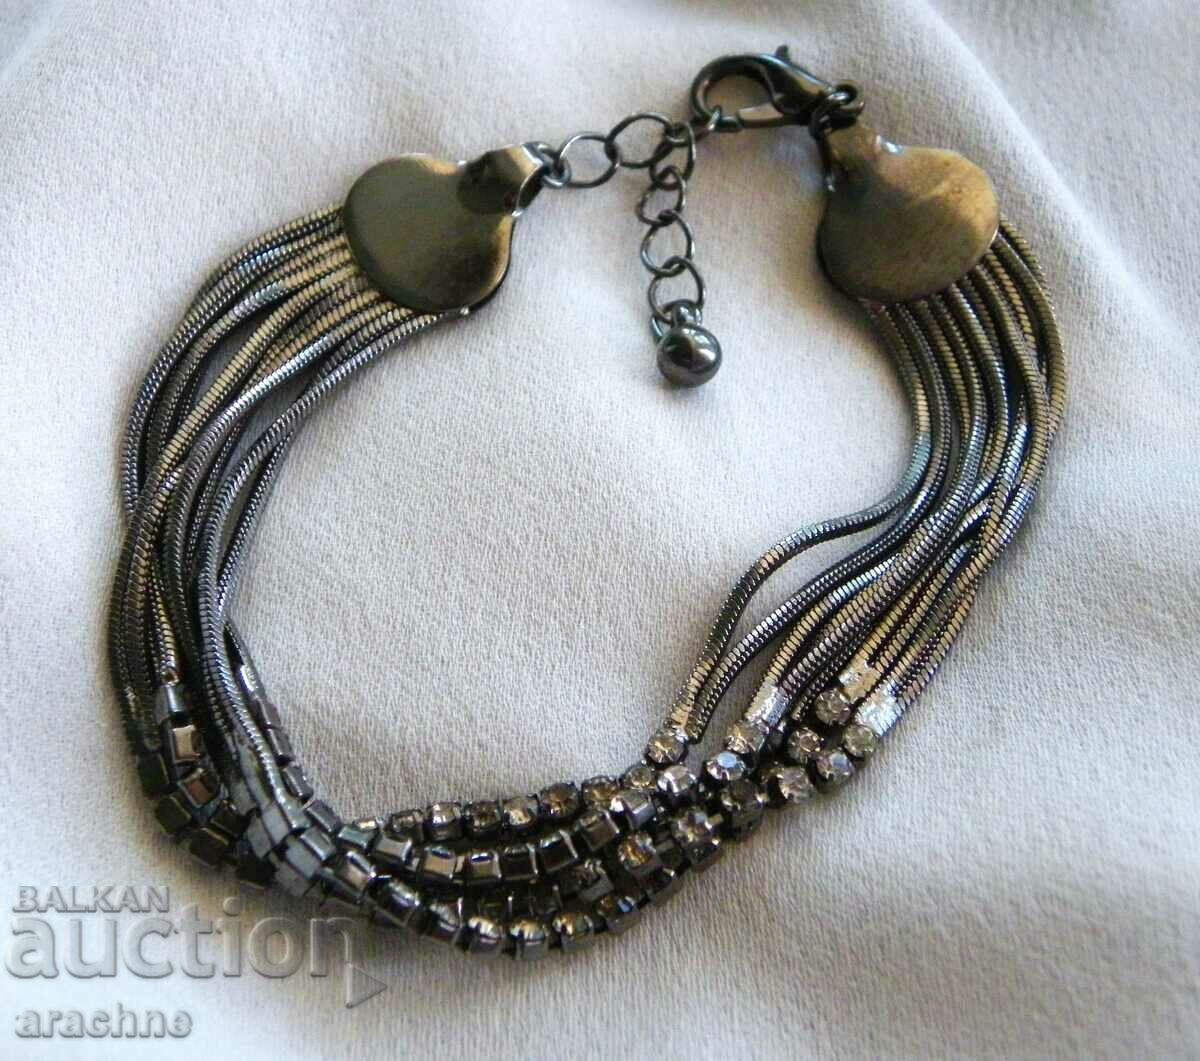 Bracelet with black rhodium and crystals